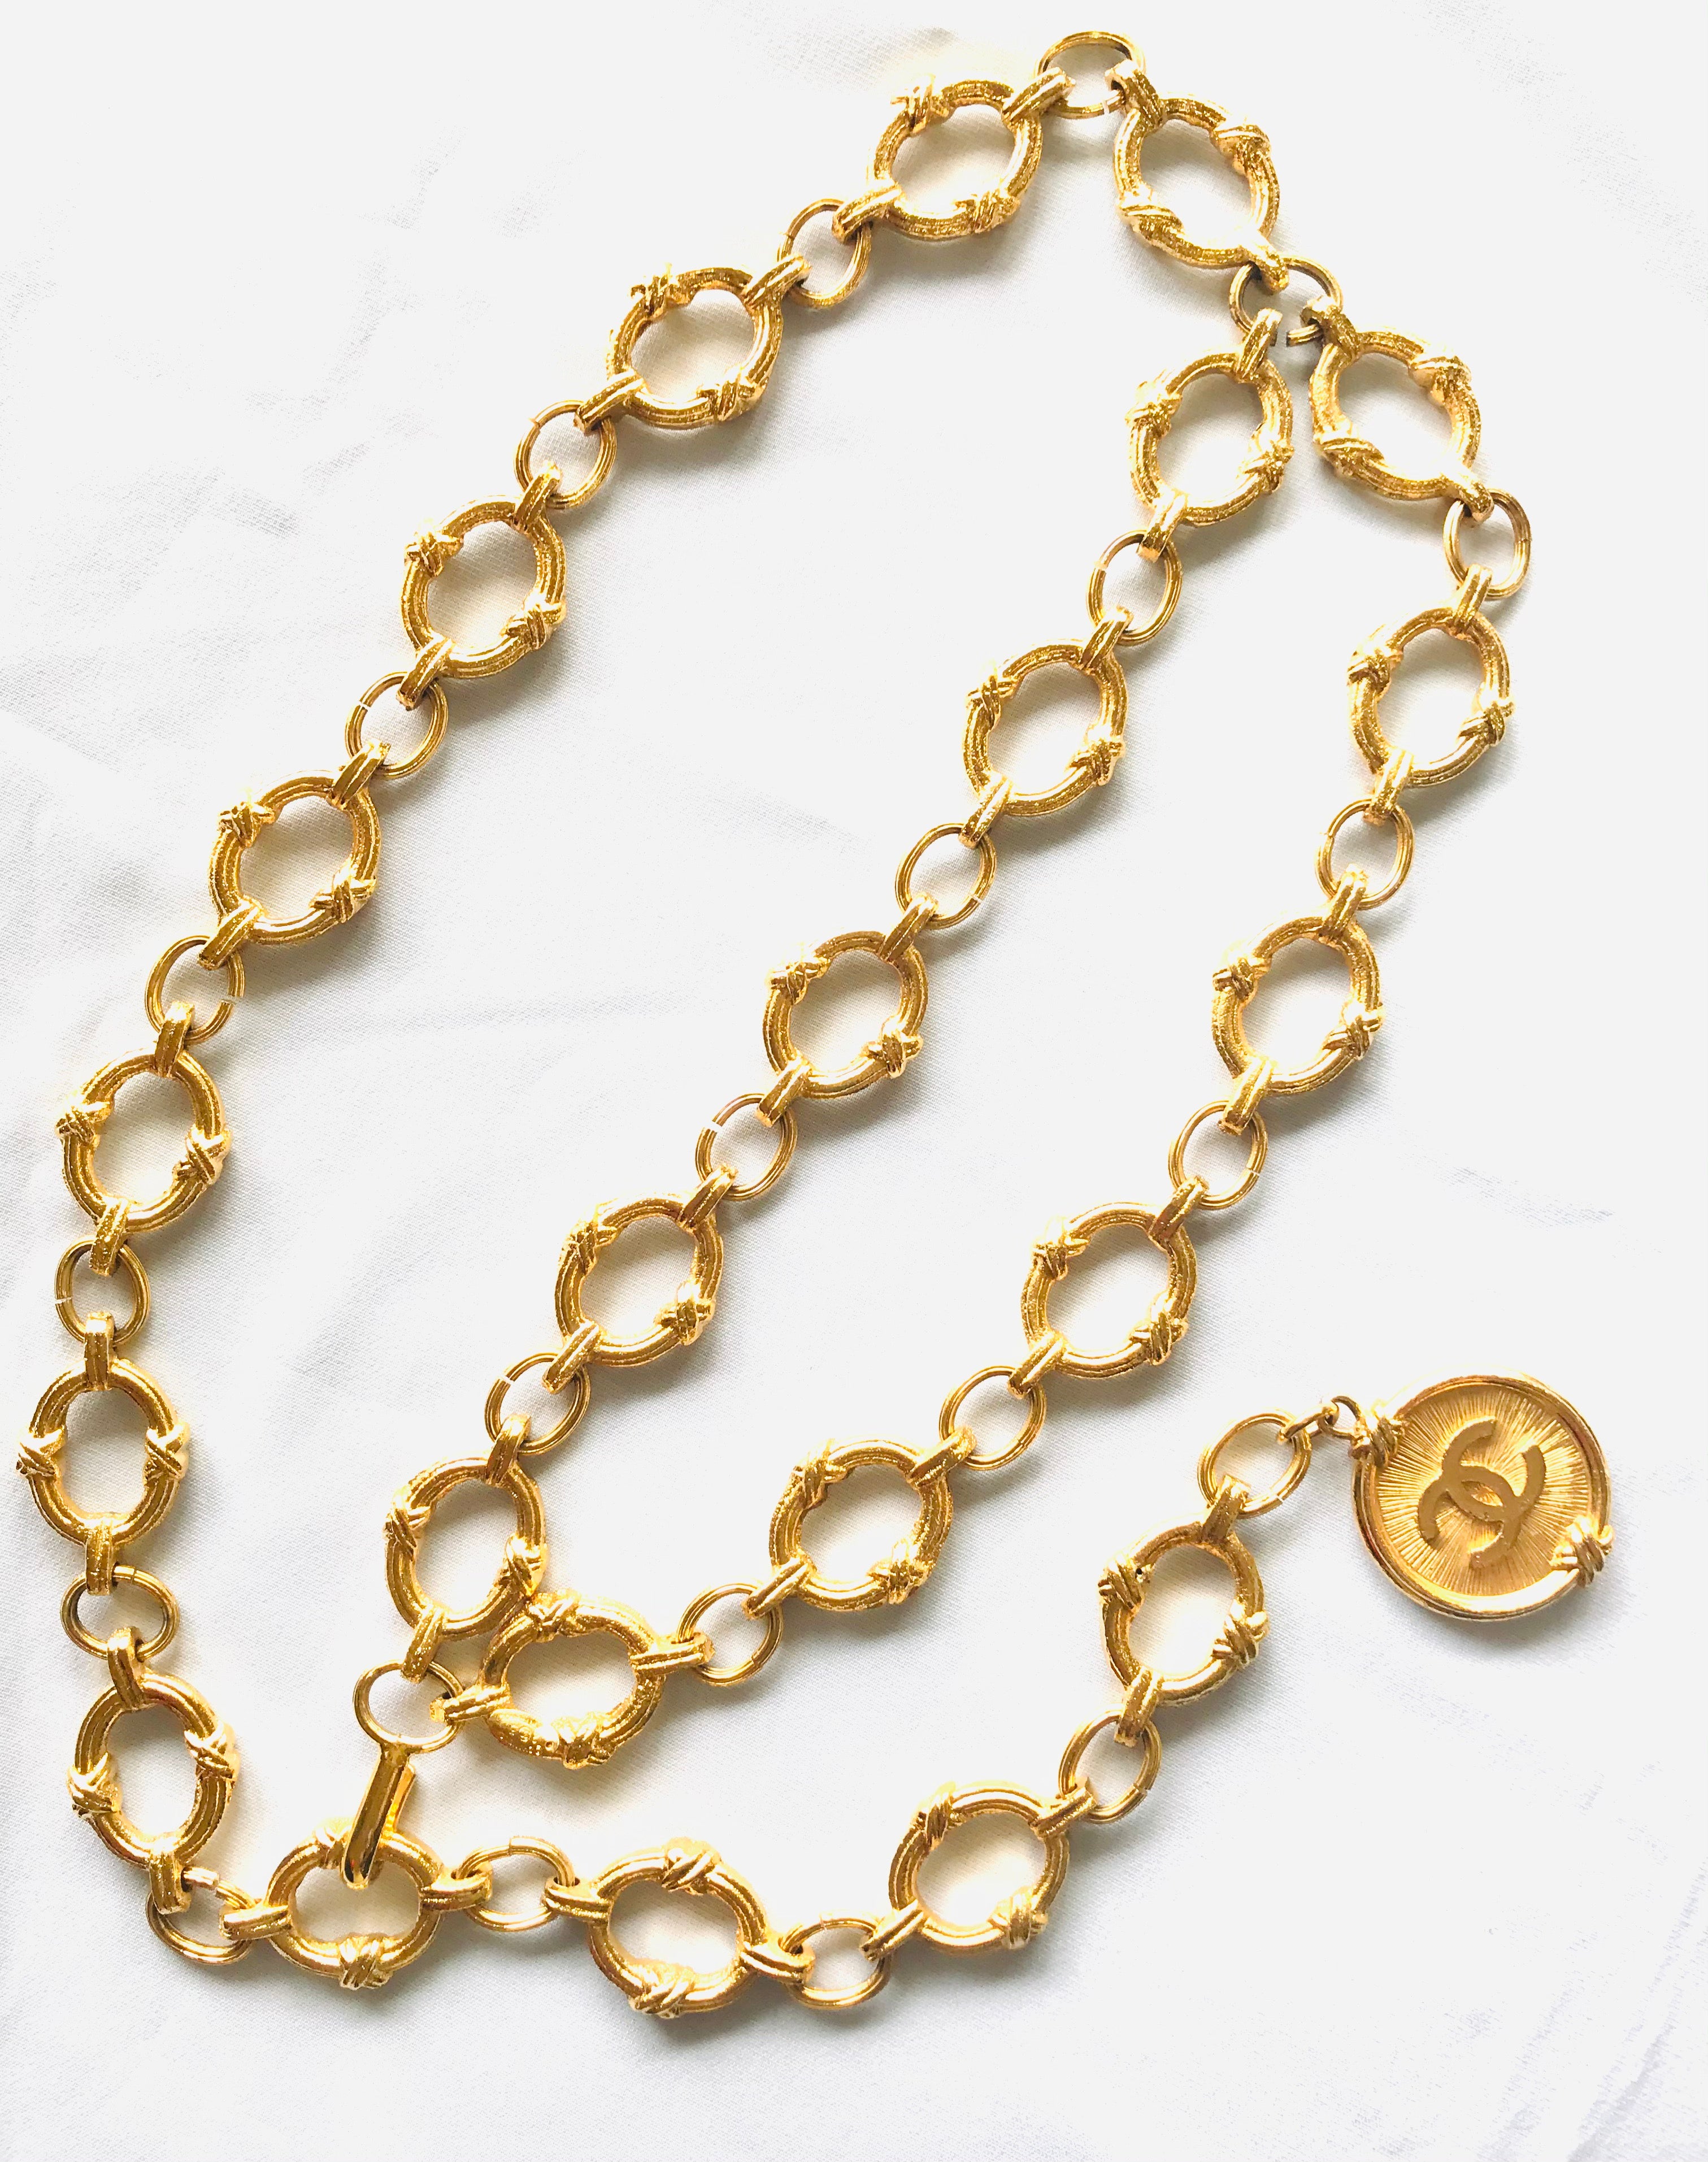 Chanel Gold Chain Belt with Star Motif For Sale at 1stdibs